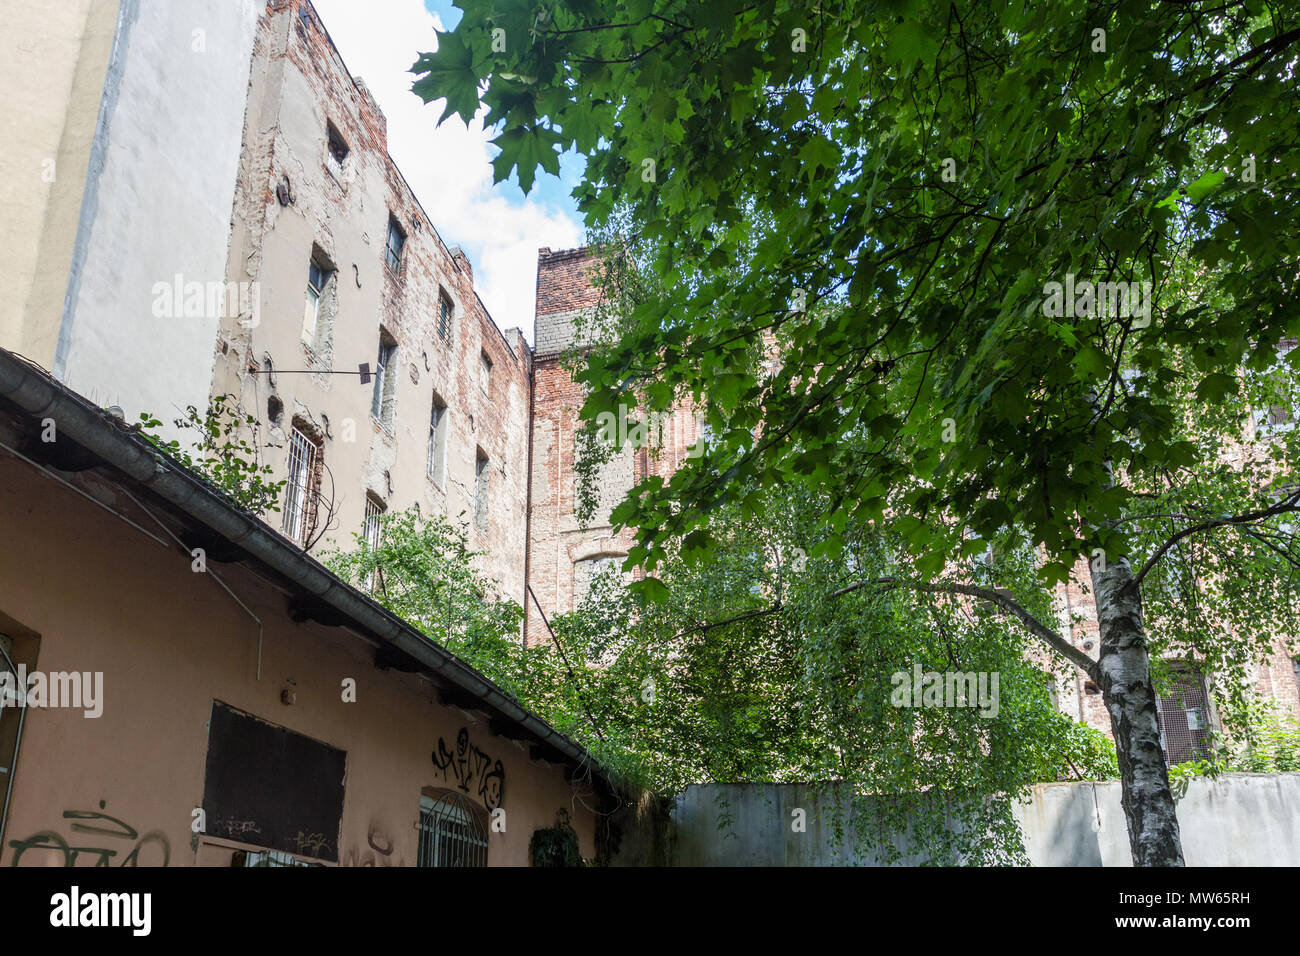 Abandoned derelict courtyard in Lodz, Poland. Stock Photo